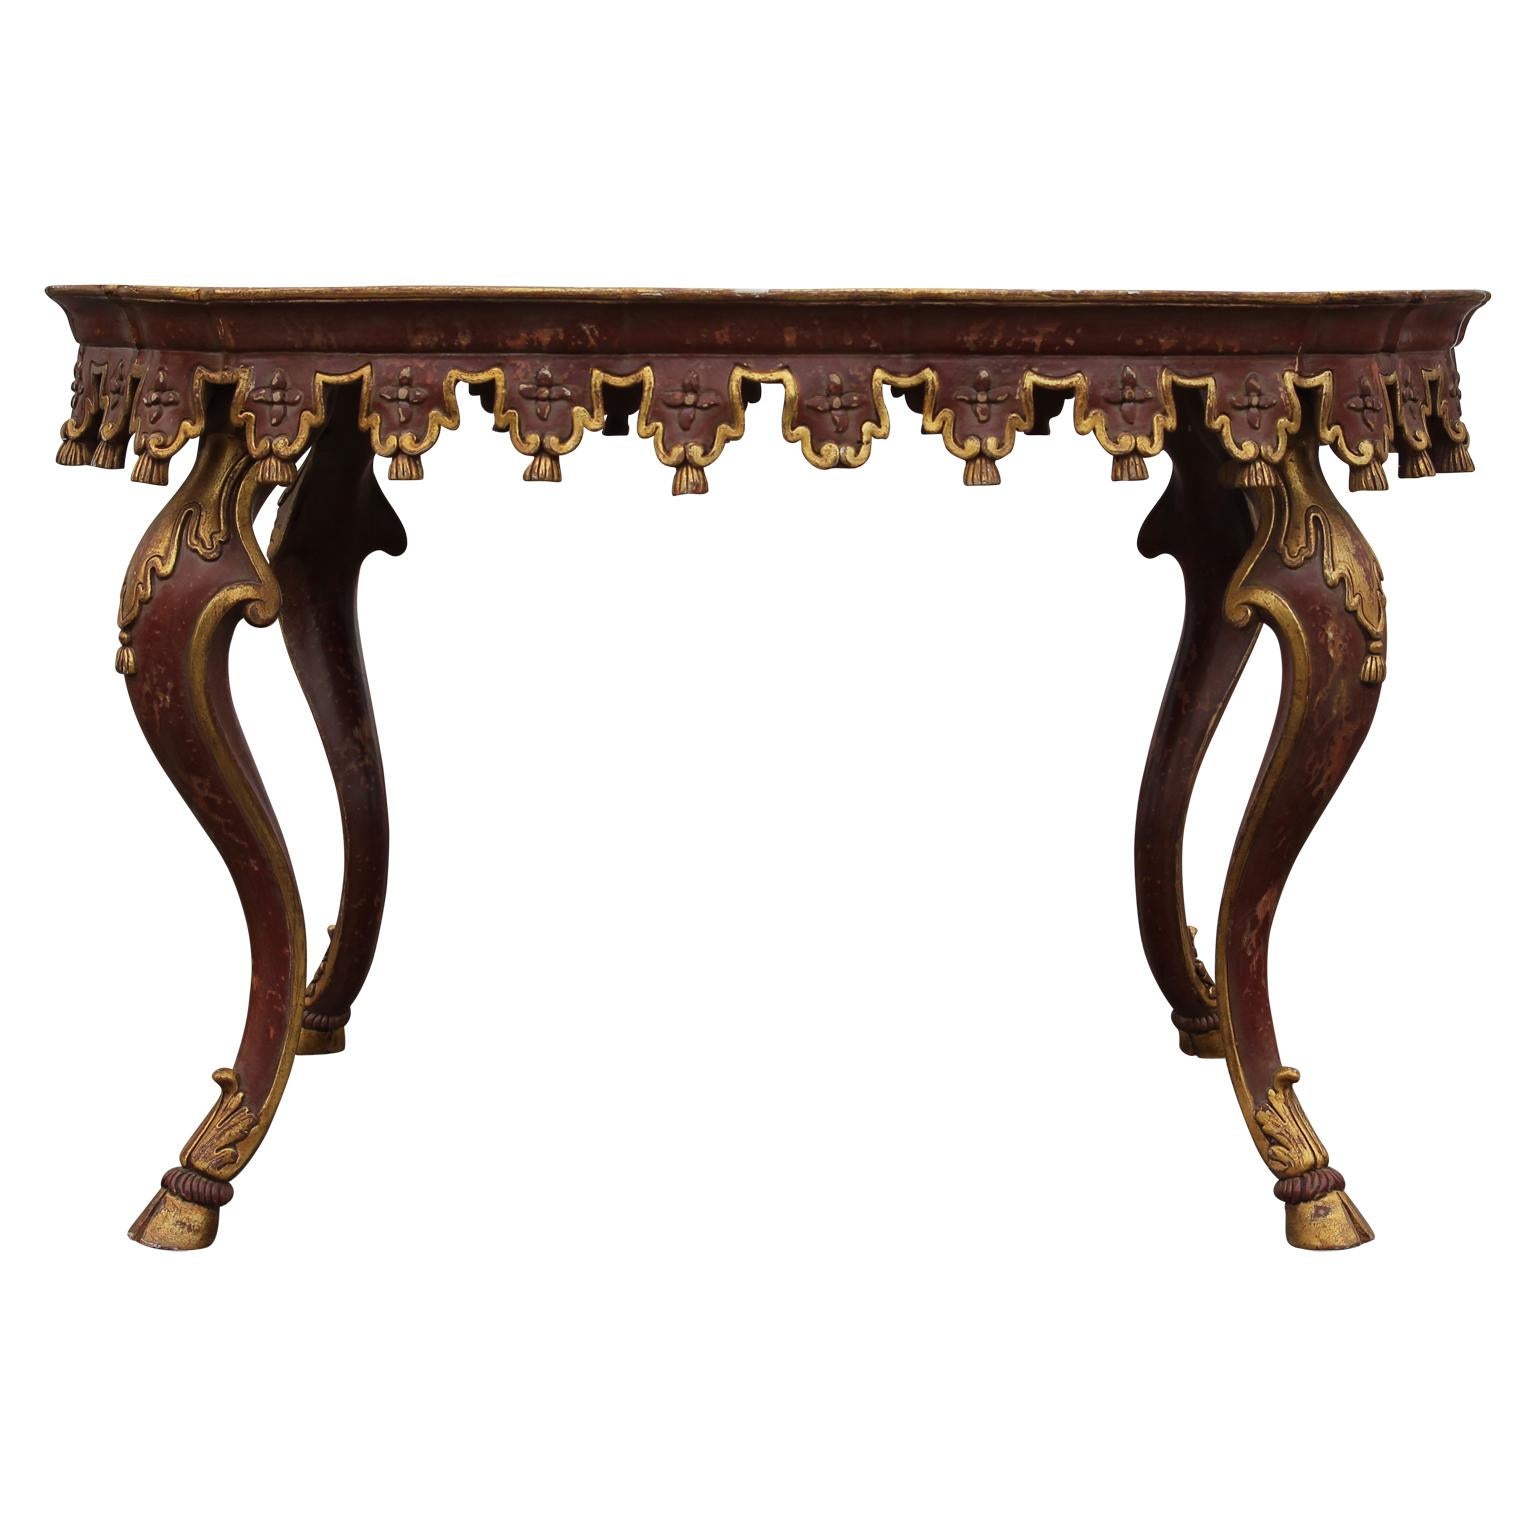 Beautiful Italian red and parcel-gilt carved tassel tea height table.
. Hoof feet
. Made in Italy
. Wonderful patina.
 